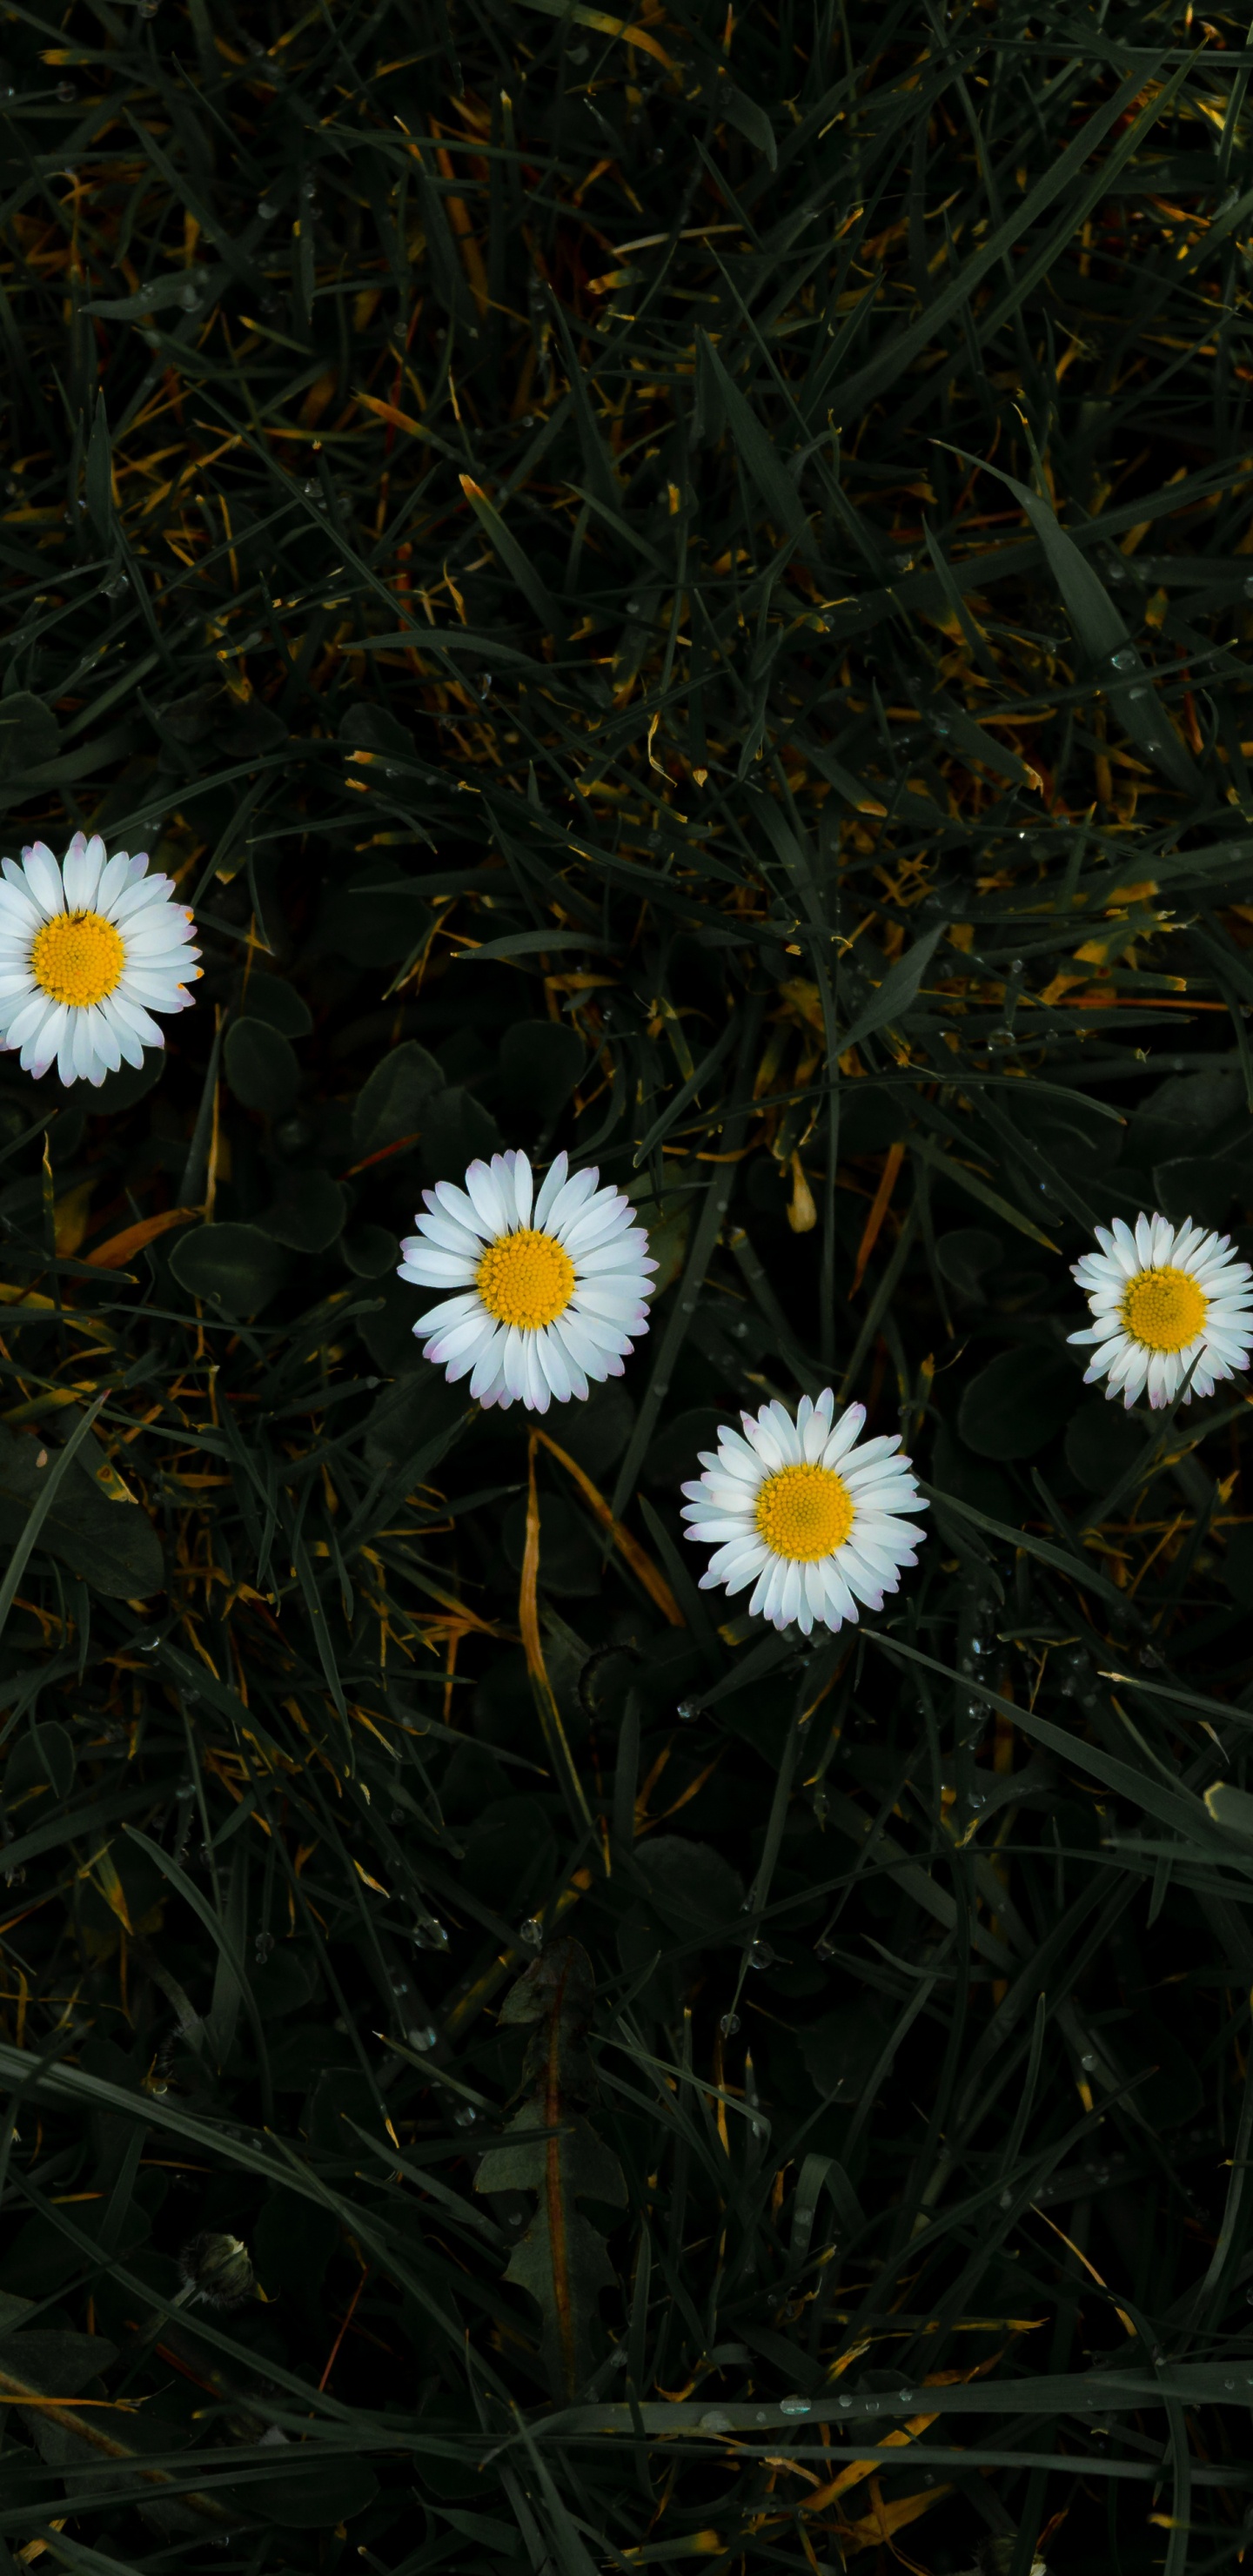 White Daisies in Bloom During Daytime. Wallpaper in 1440x2960 Resolution